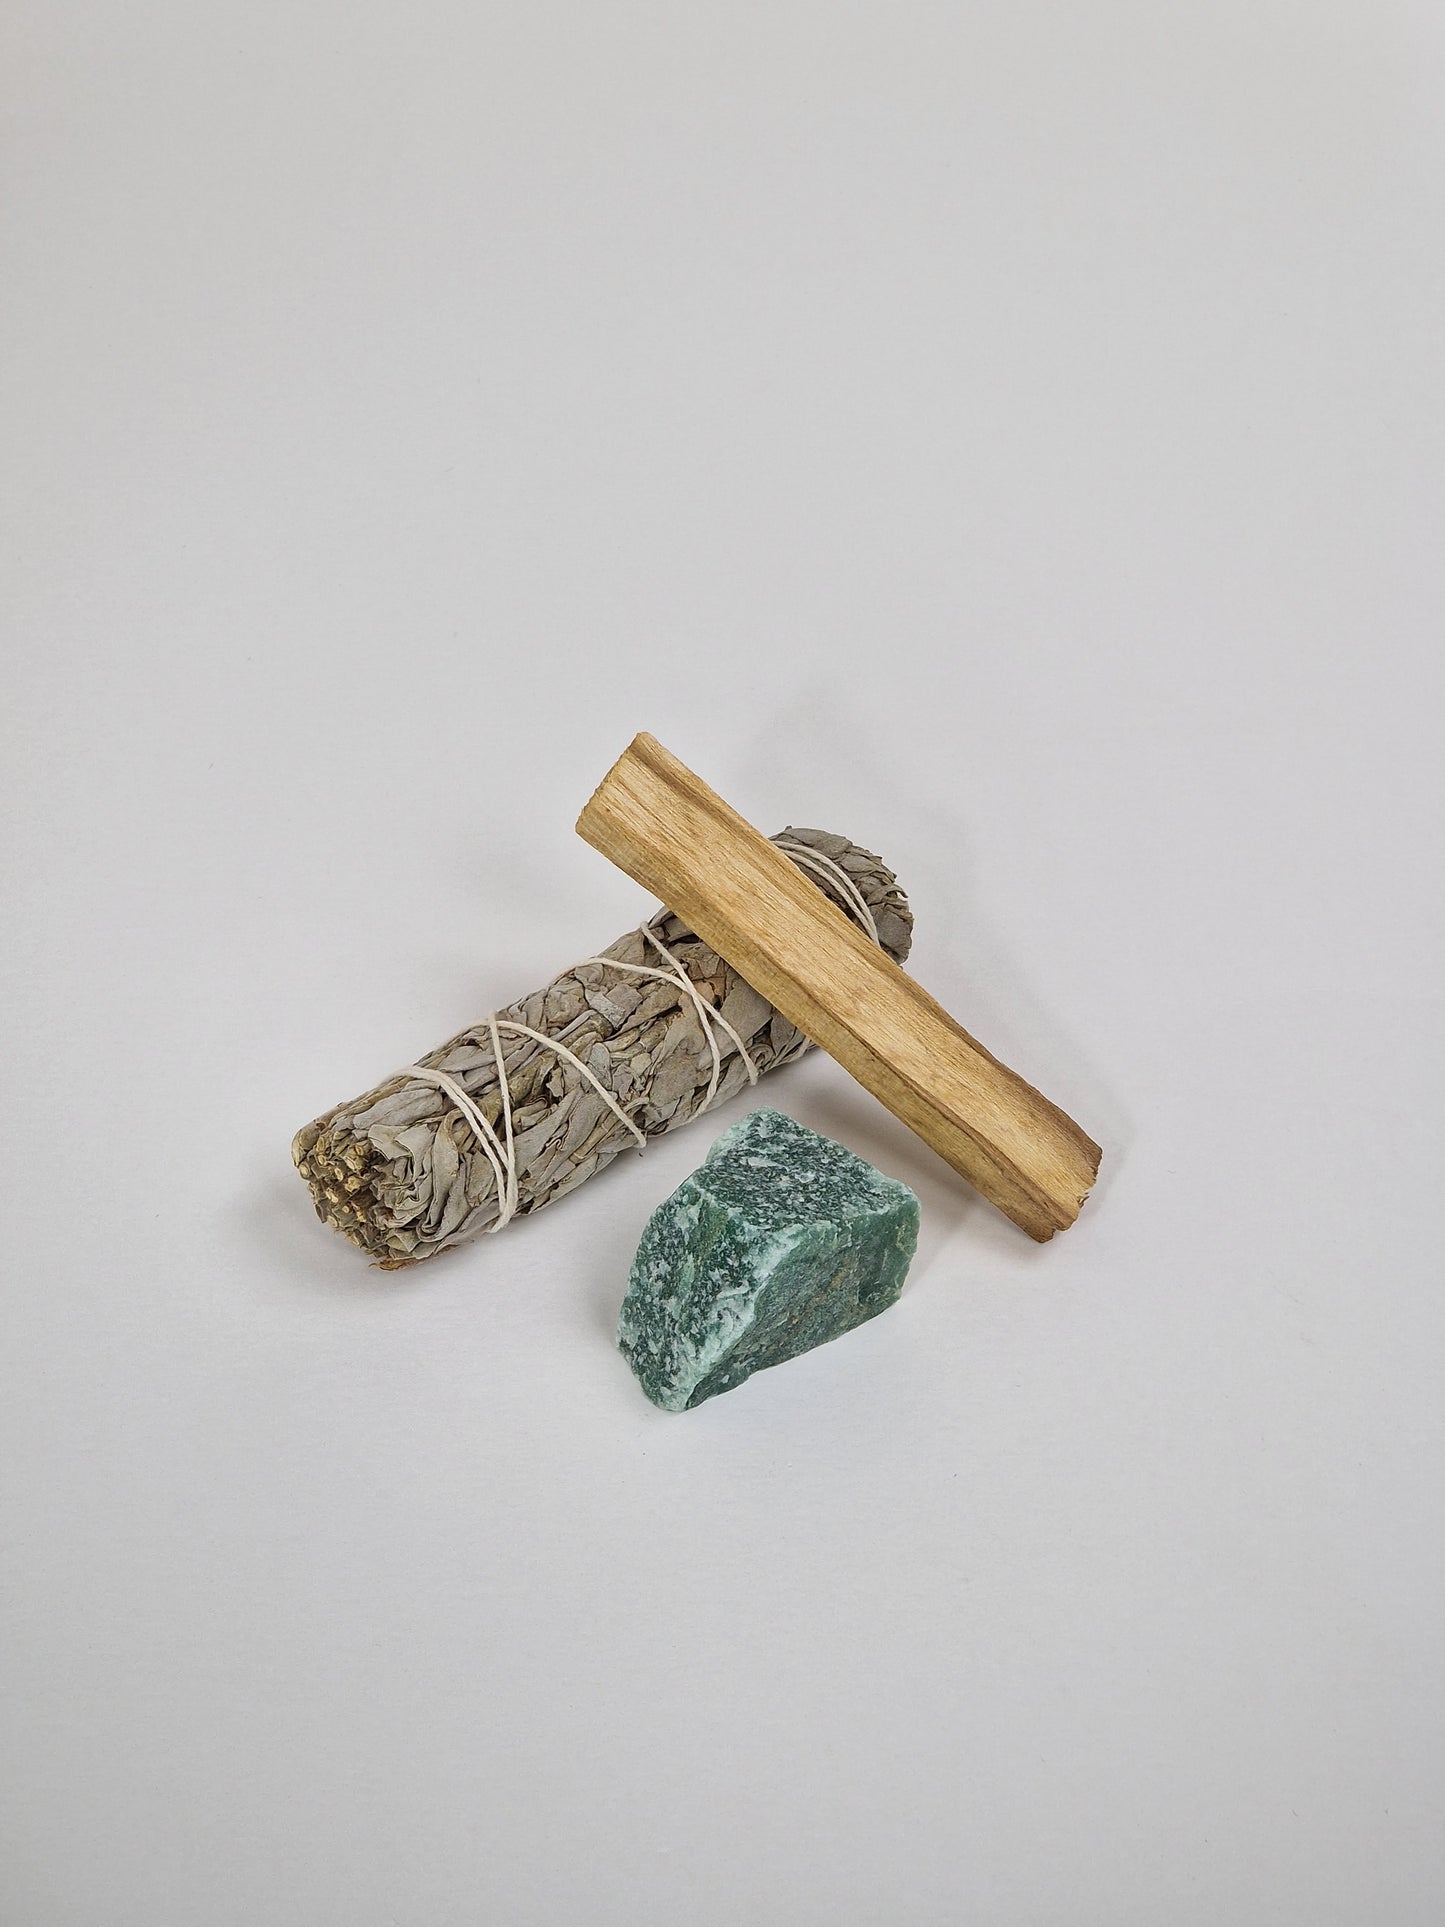 Green Aventurine crystal with sage and smudge stick